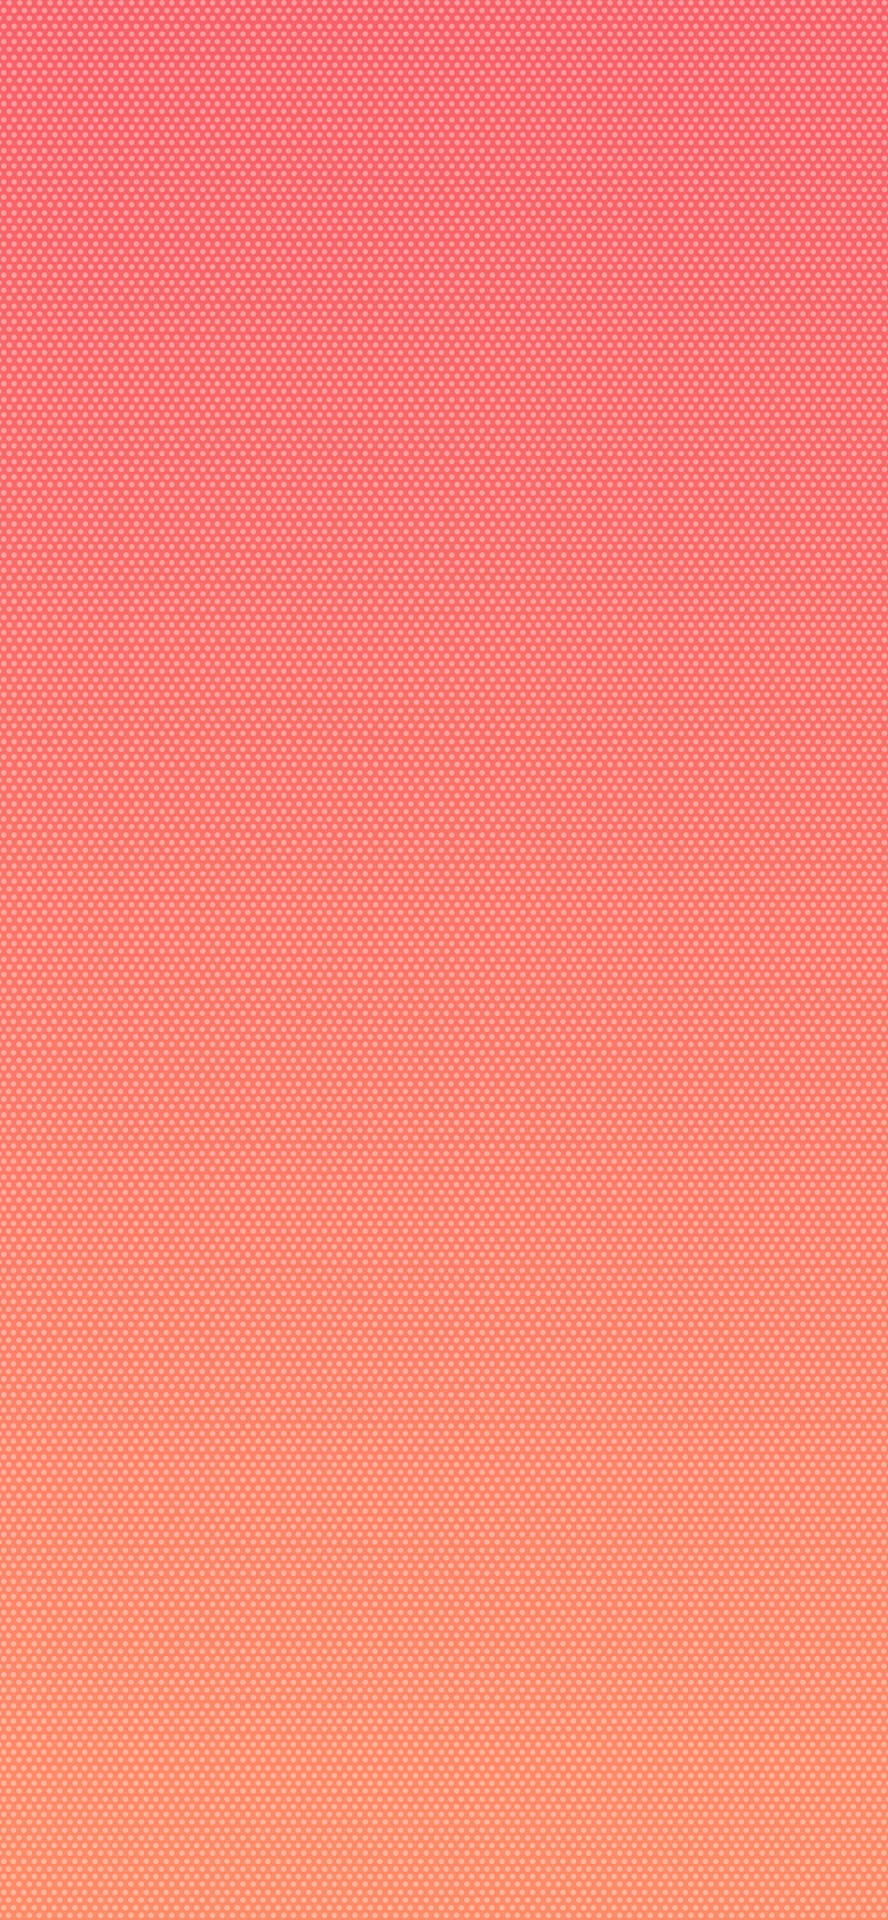 A Pink And Orange Background With A Dotted Pattern Background